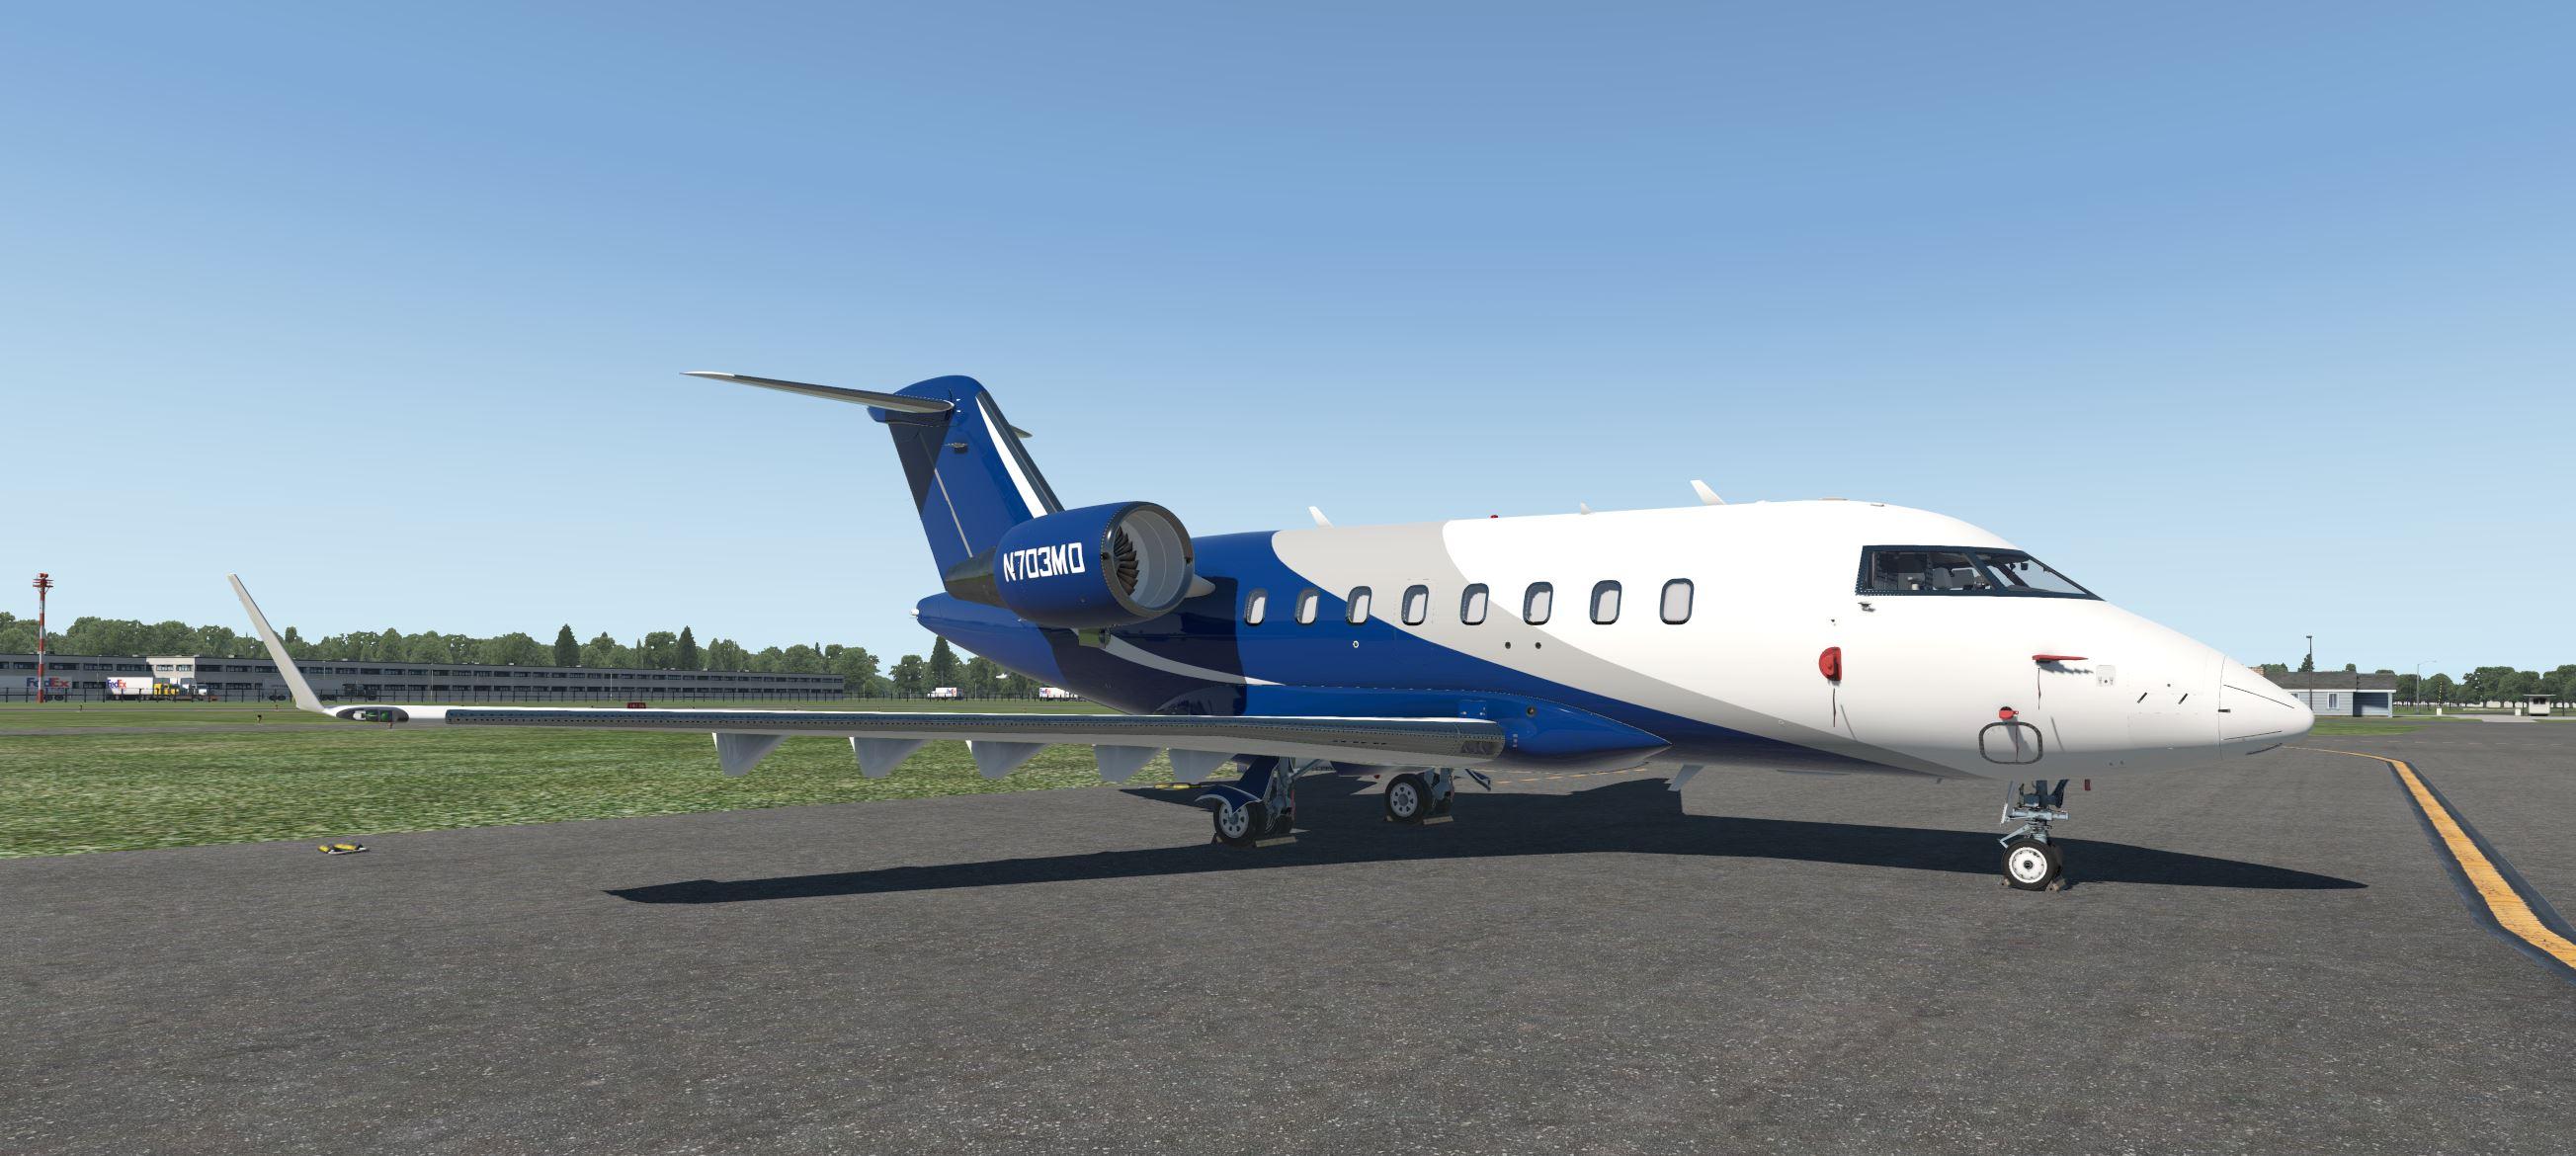 Hot Start Challenger 650 Blue and Grey (N703MD)